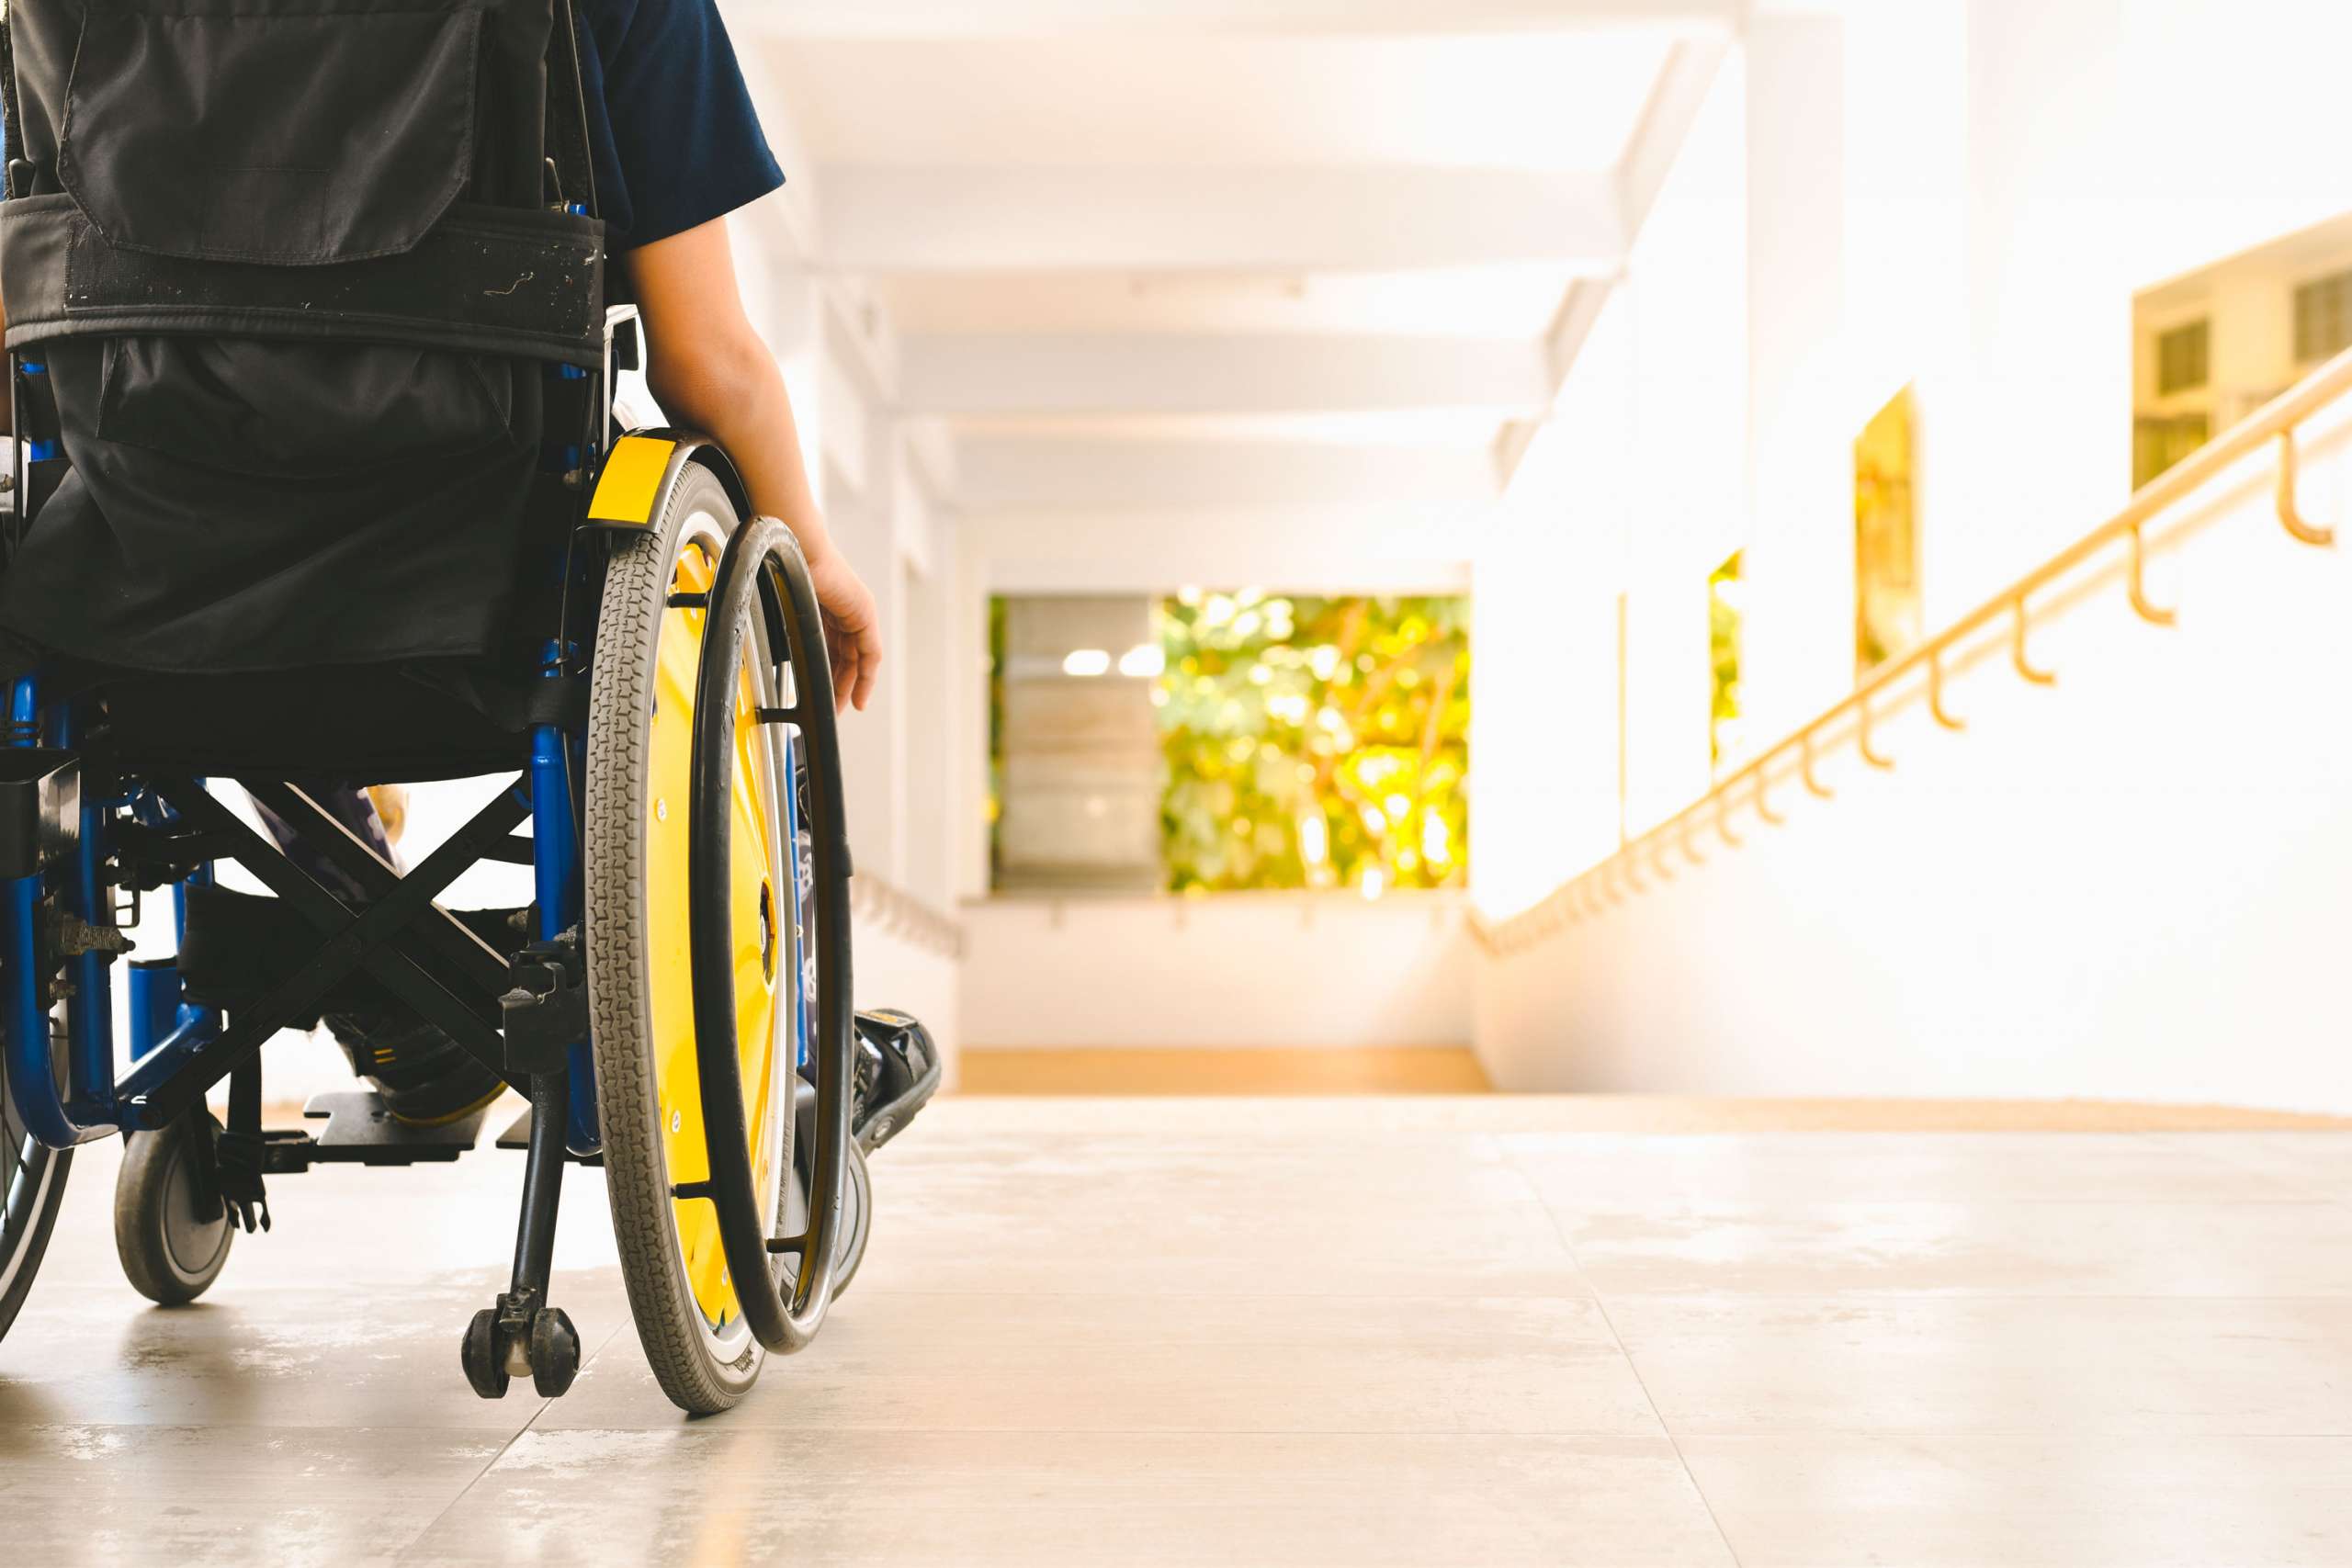 A photograph of a person in a wheelchair, taken from behind